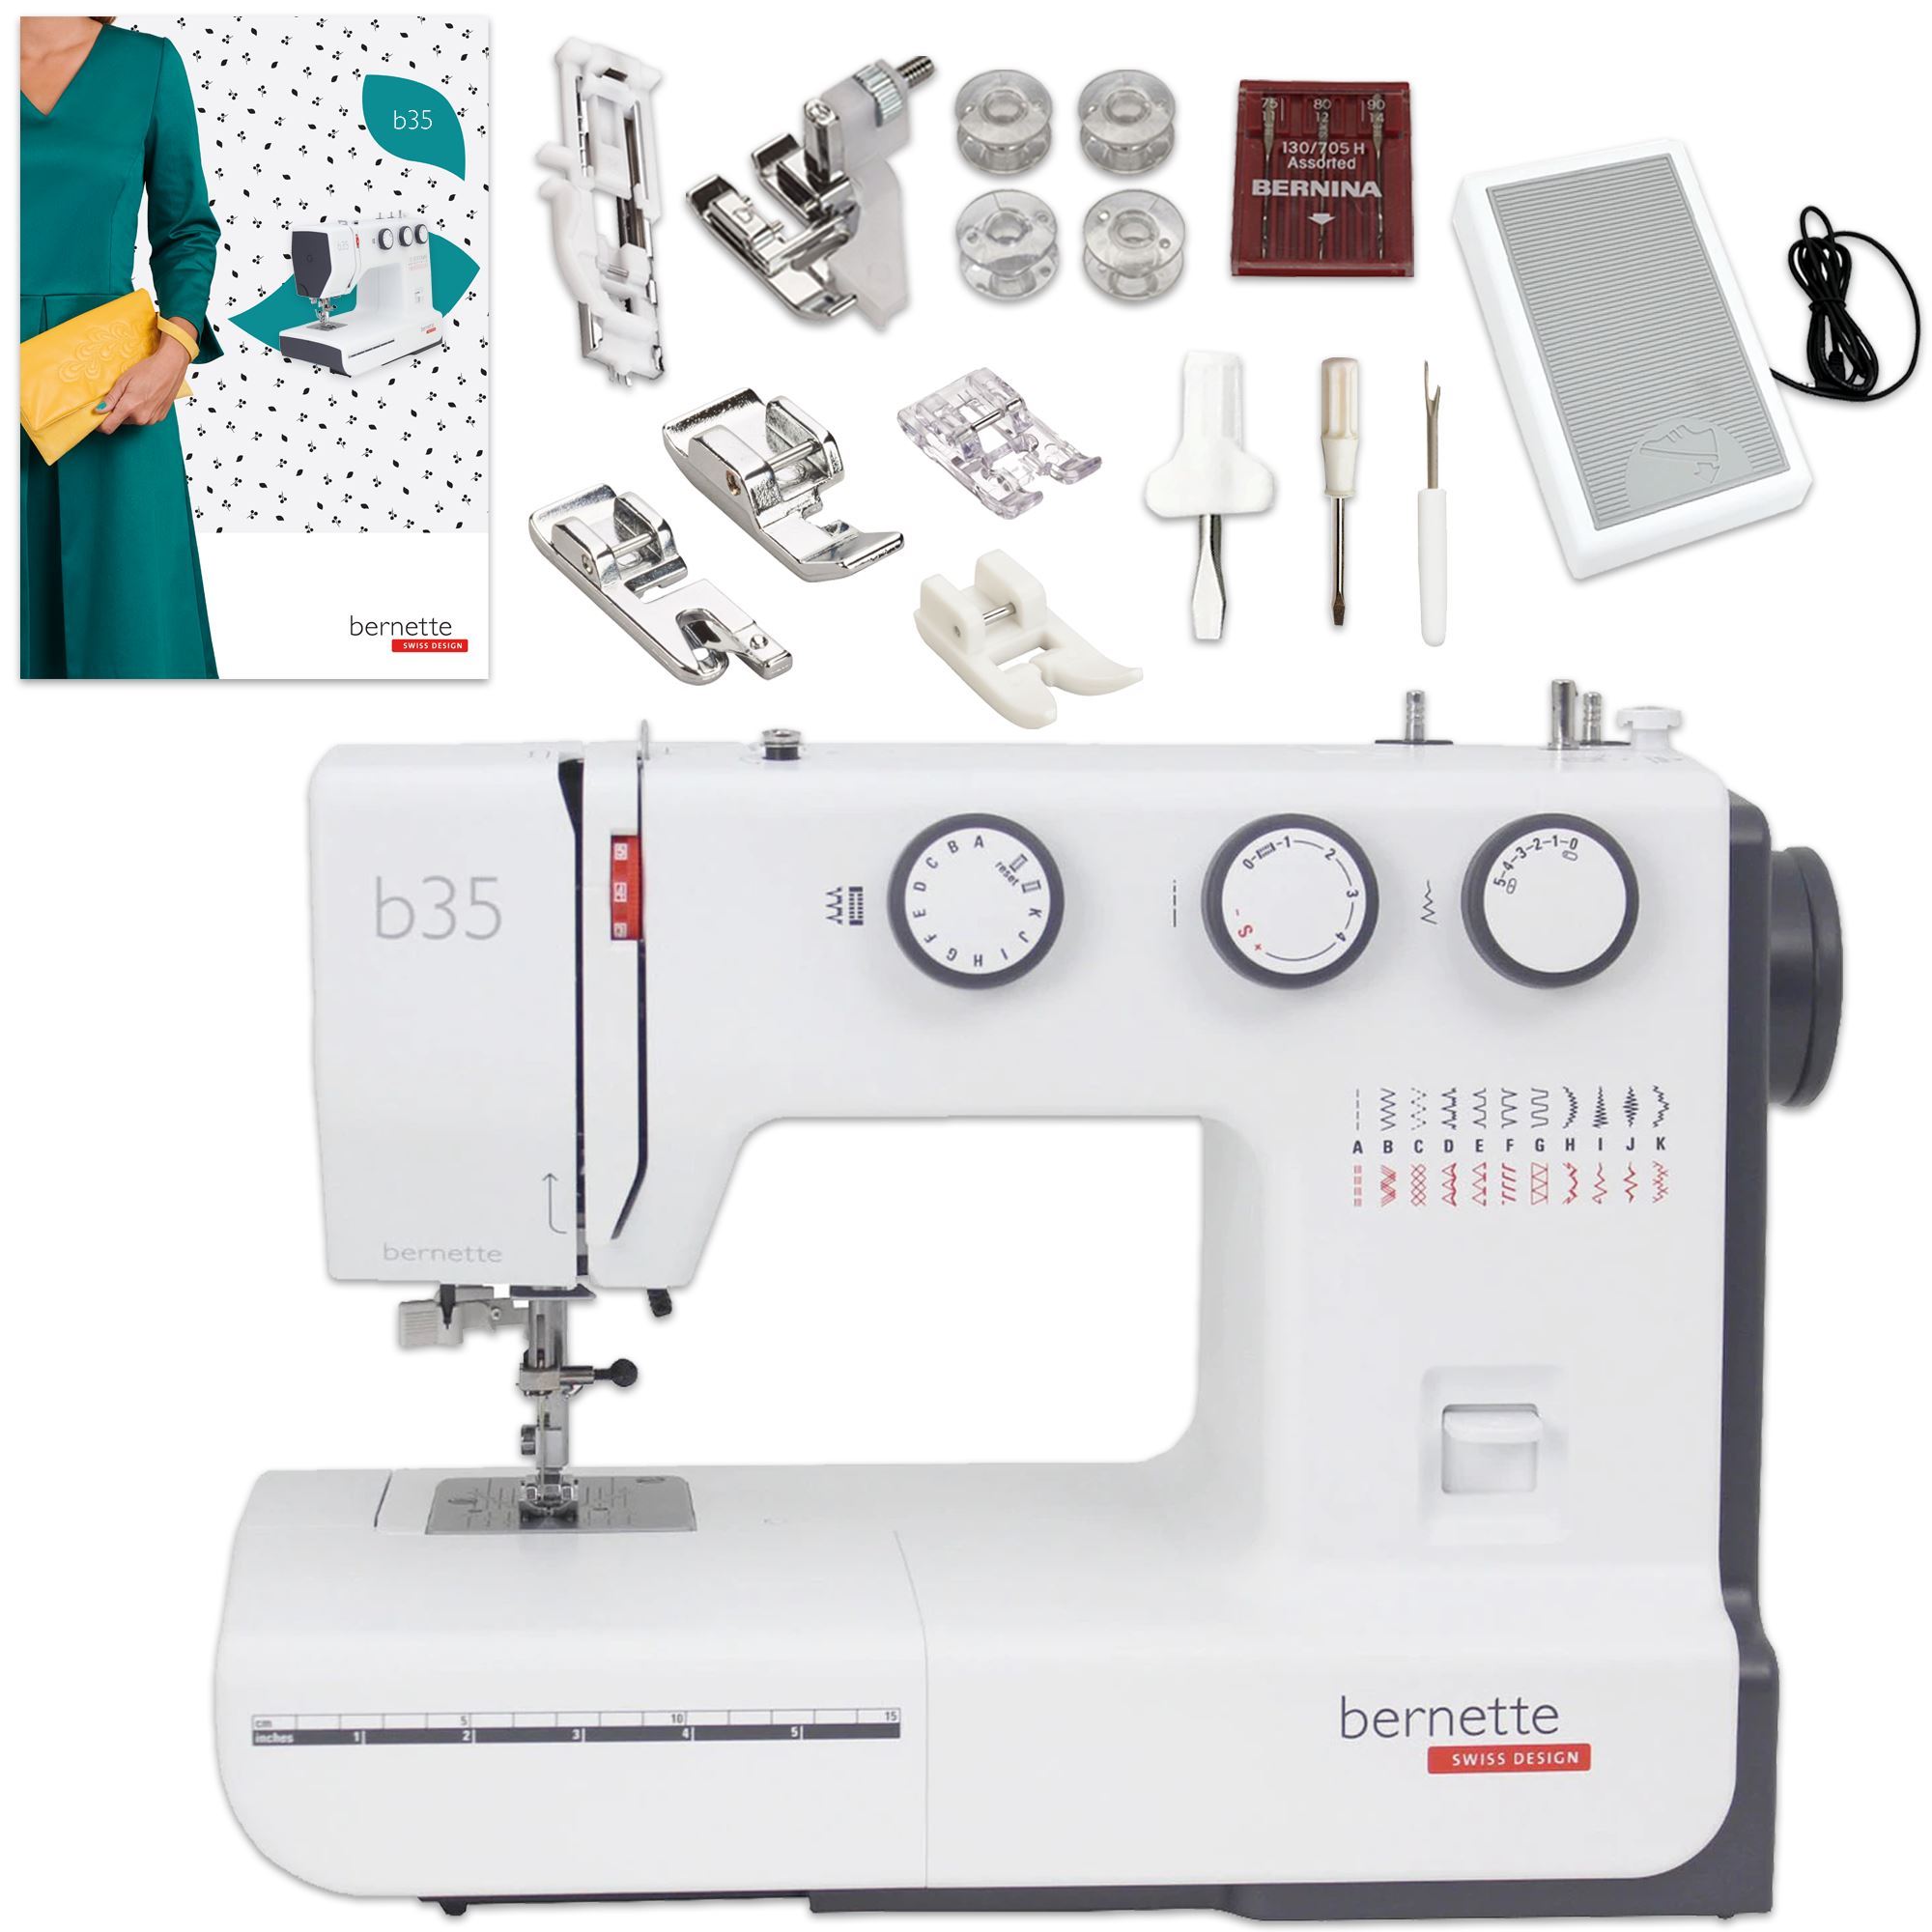 used Bernette b05 Academy sewing machine